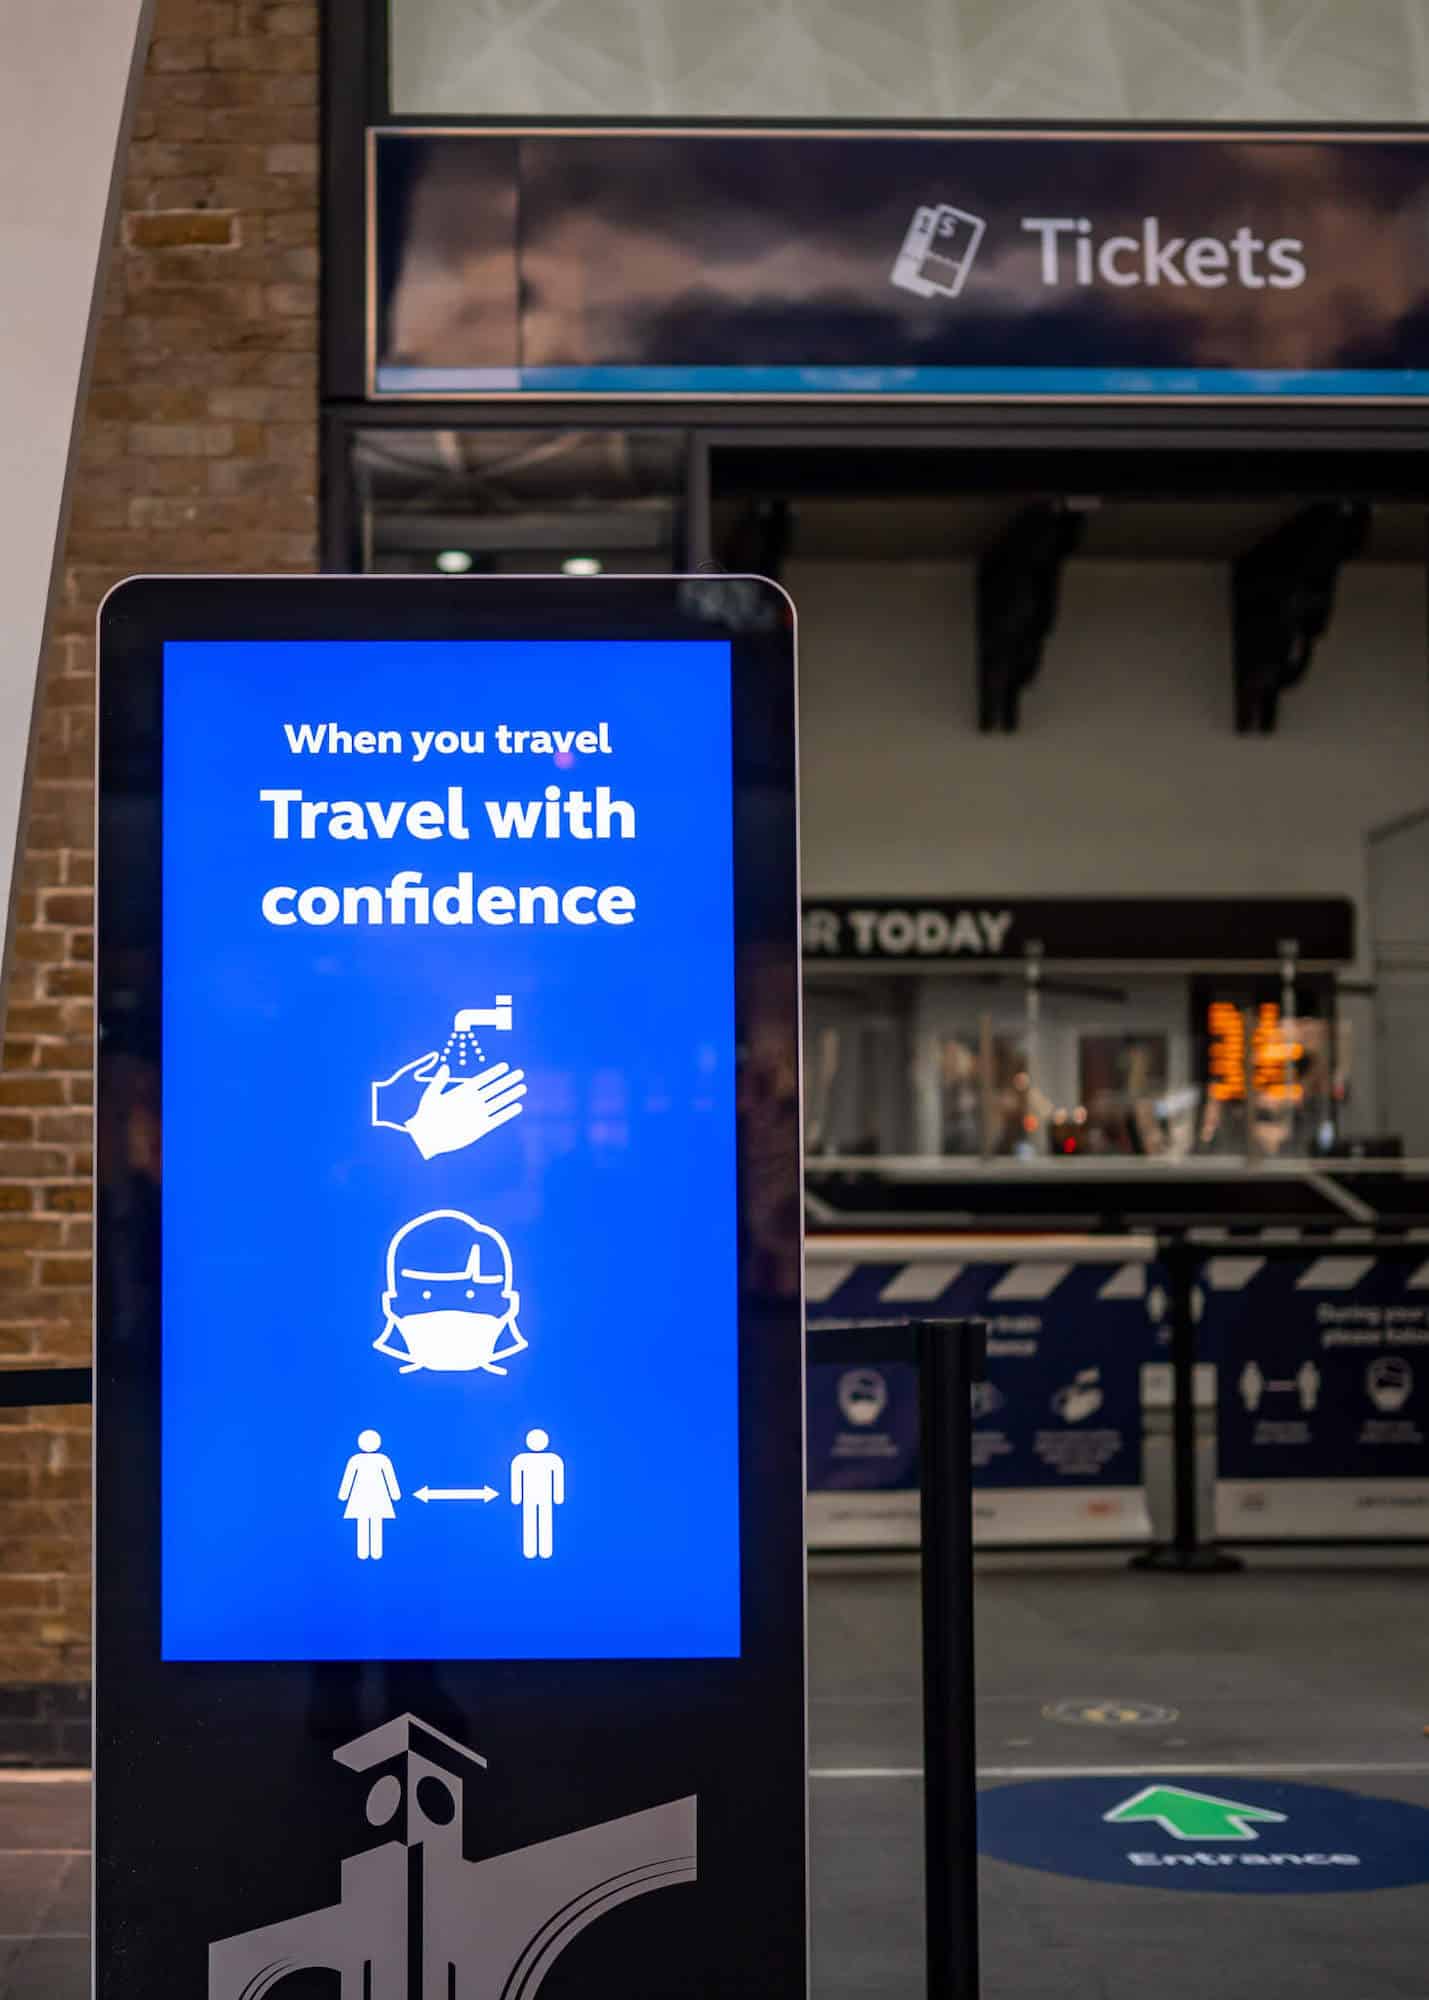 A digital sign located outside of the ticket office of a travel station. The sign reads "When you travel, travel with confidence" and displays white icons for hand washing, mask wearing and social distancing on a blue background.